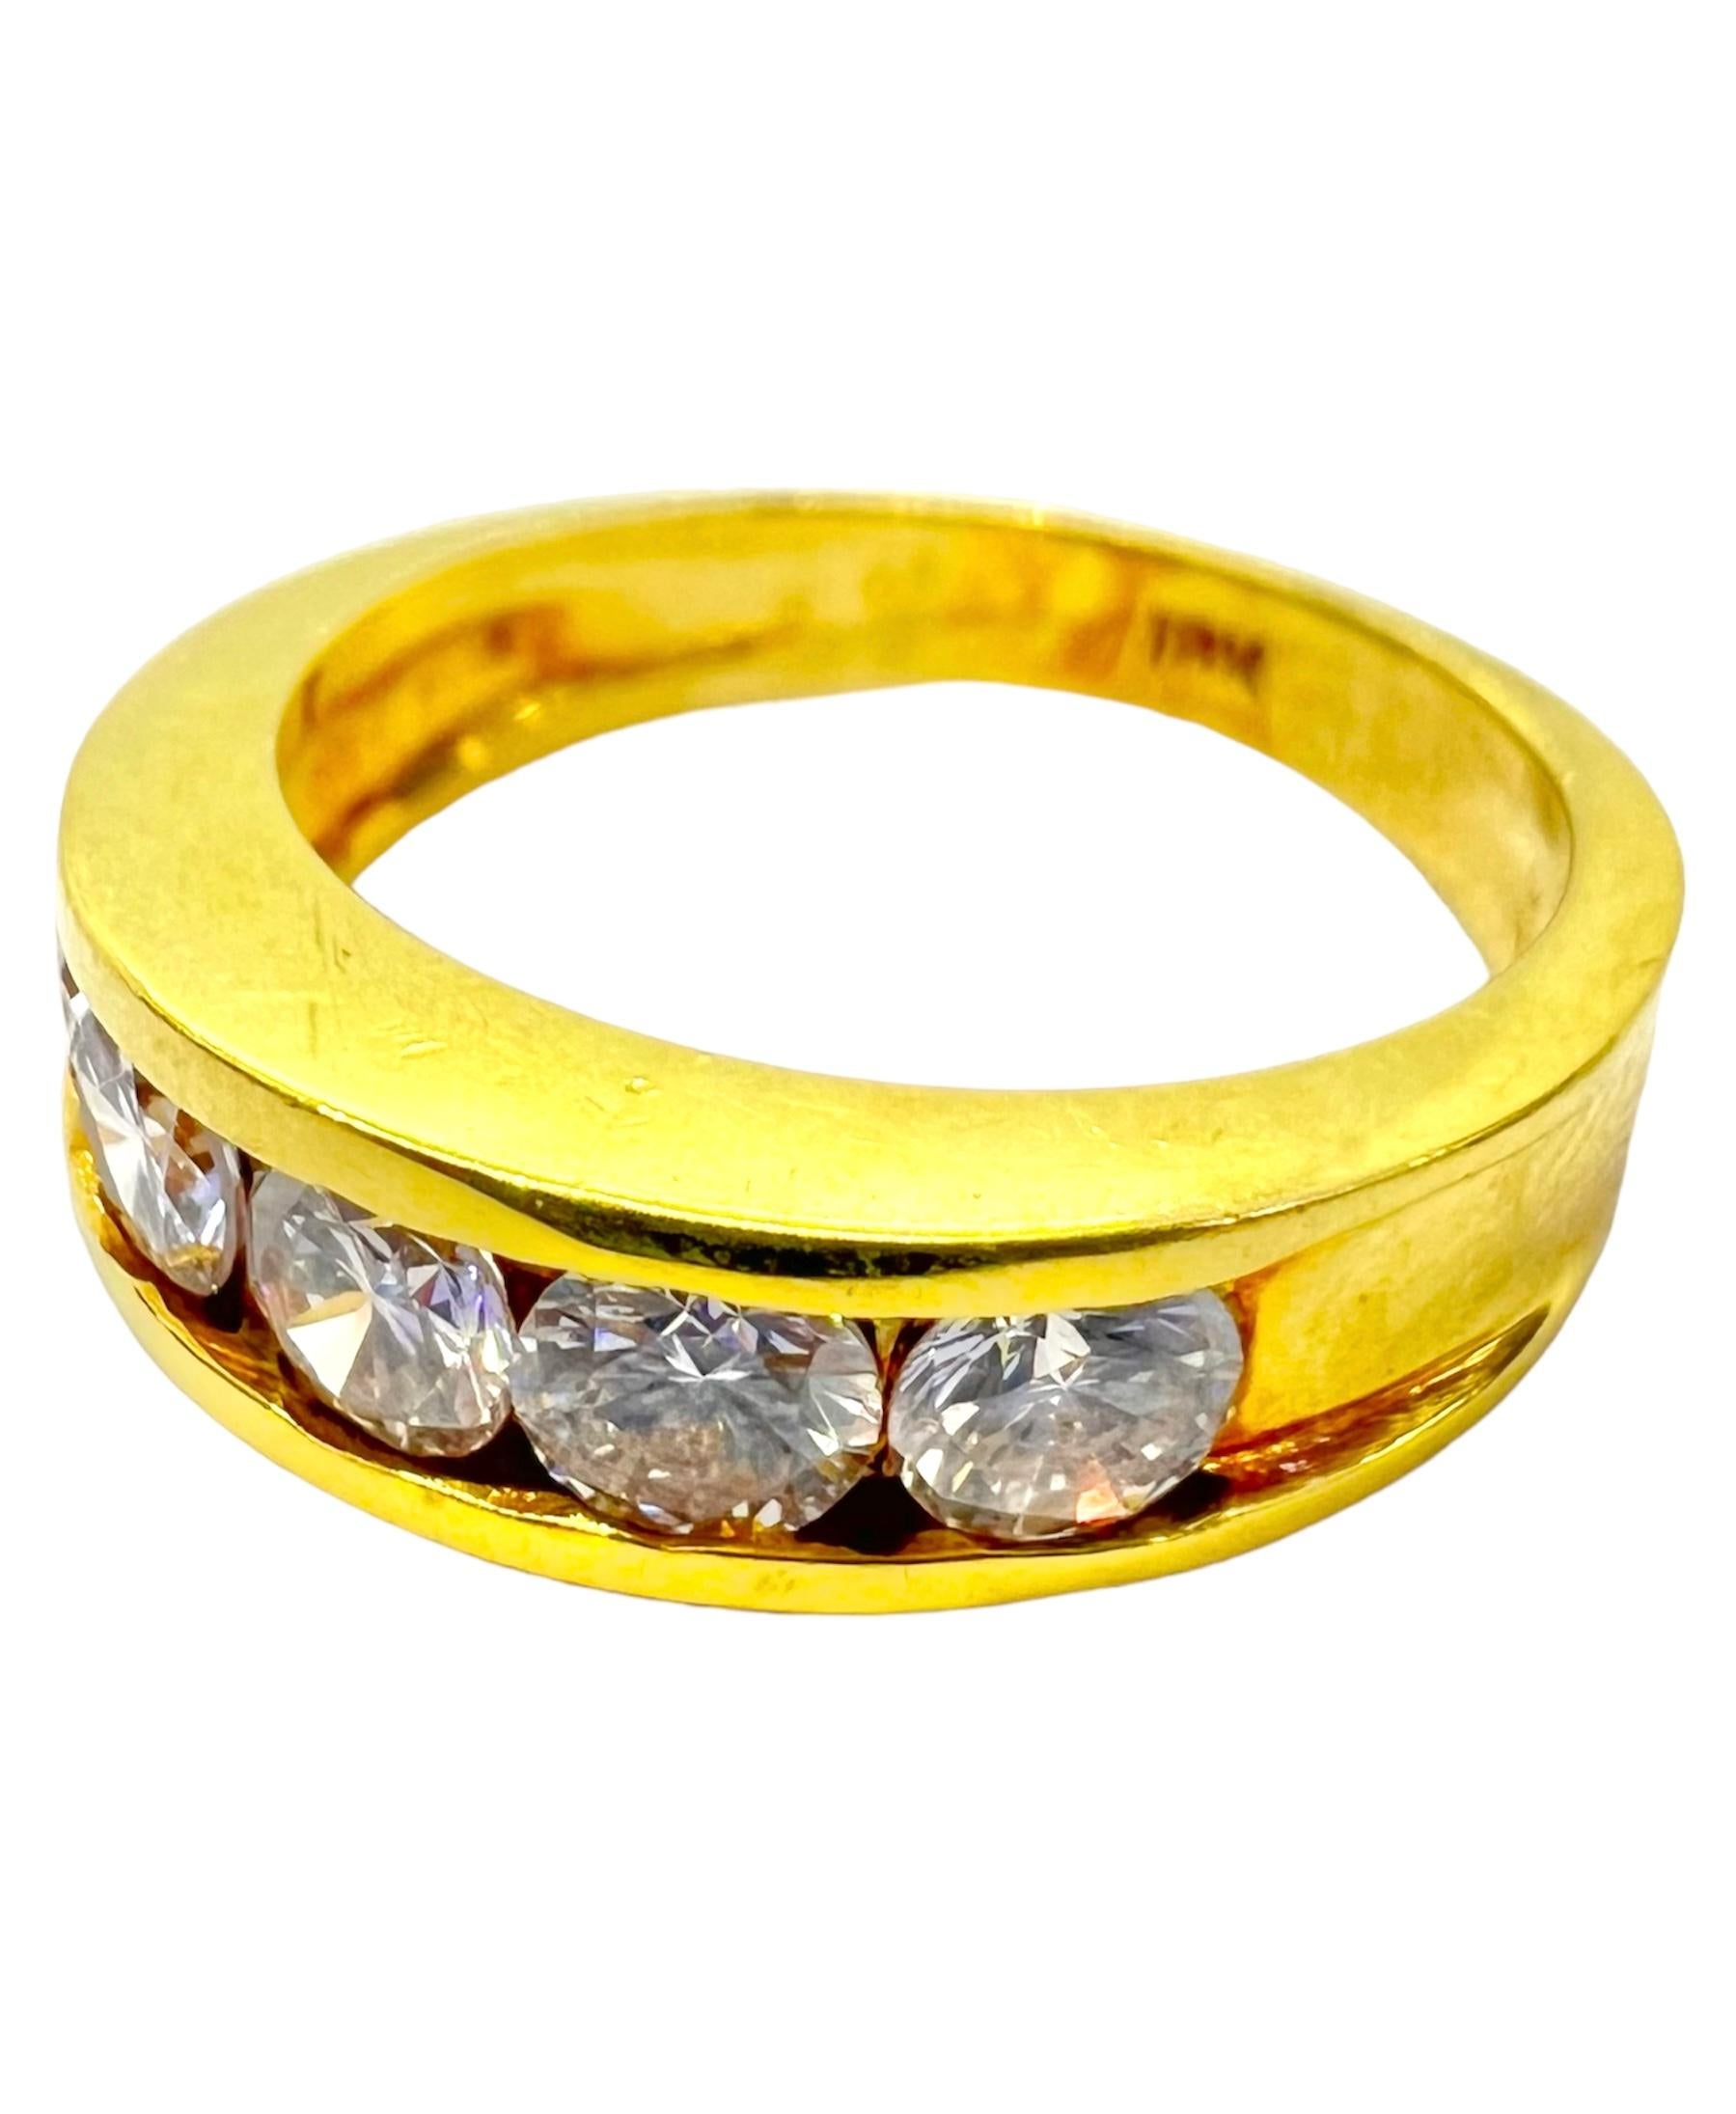 18K yellow gold band ring with round diamonds.

Sophia D by Joseph Dardashti LTD has been known worldwide for 35 years and are inspired by classic Art Deco design that merges with modern manufacturing techniques.